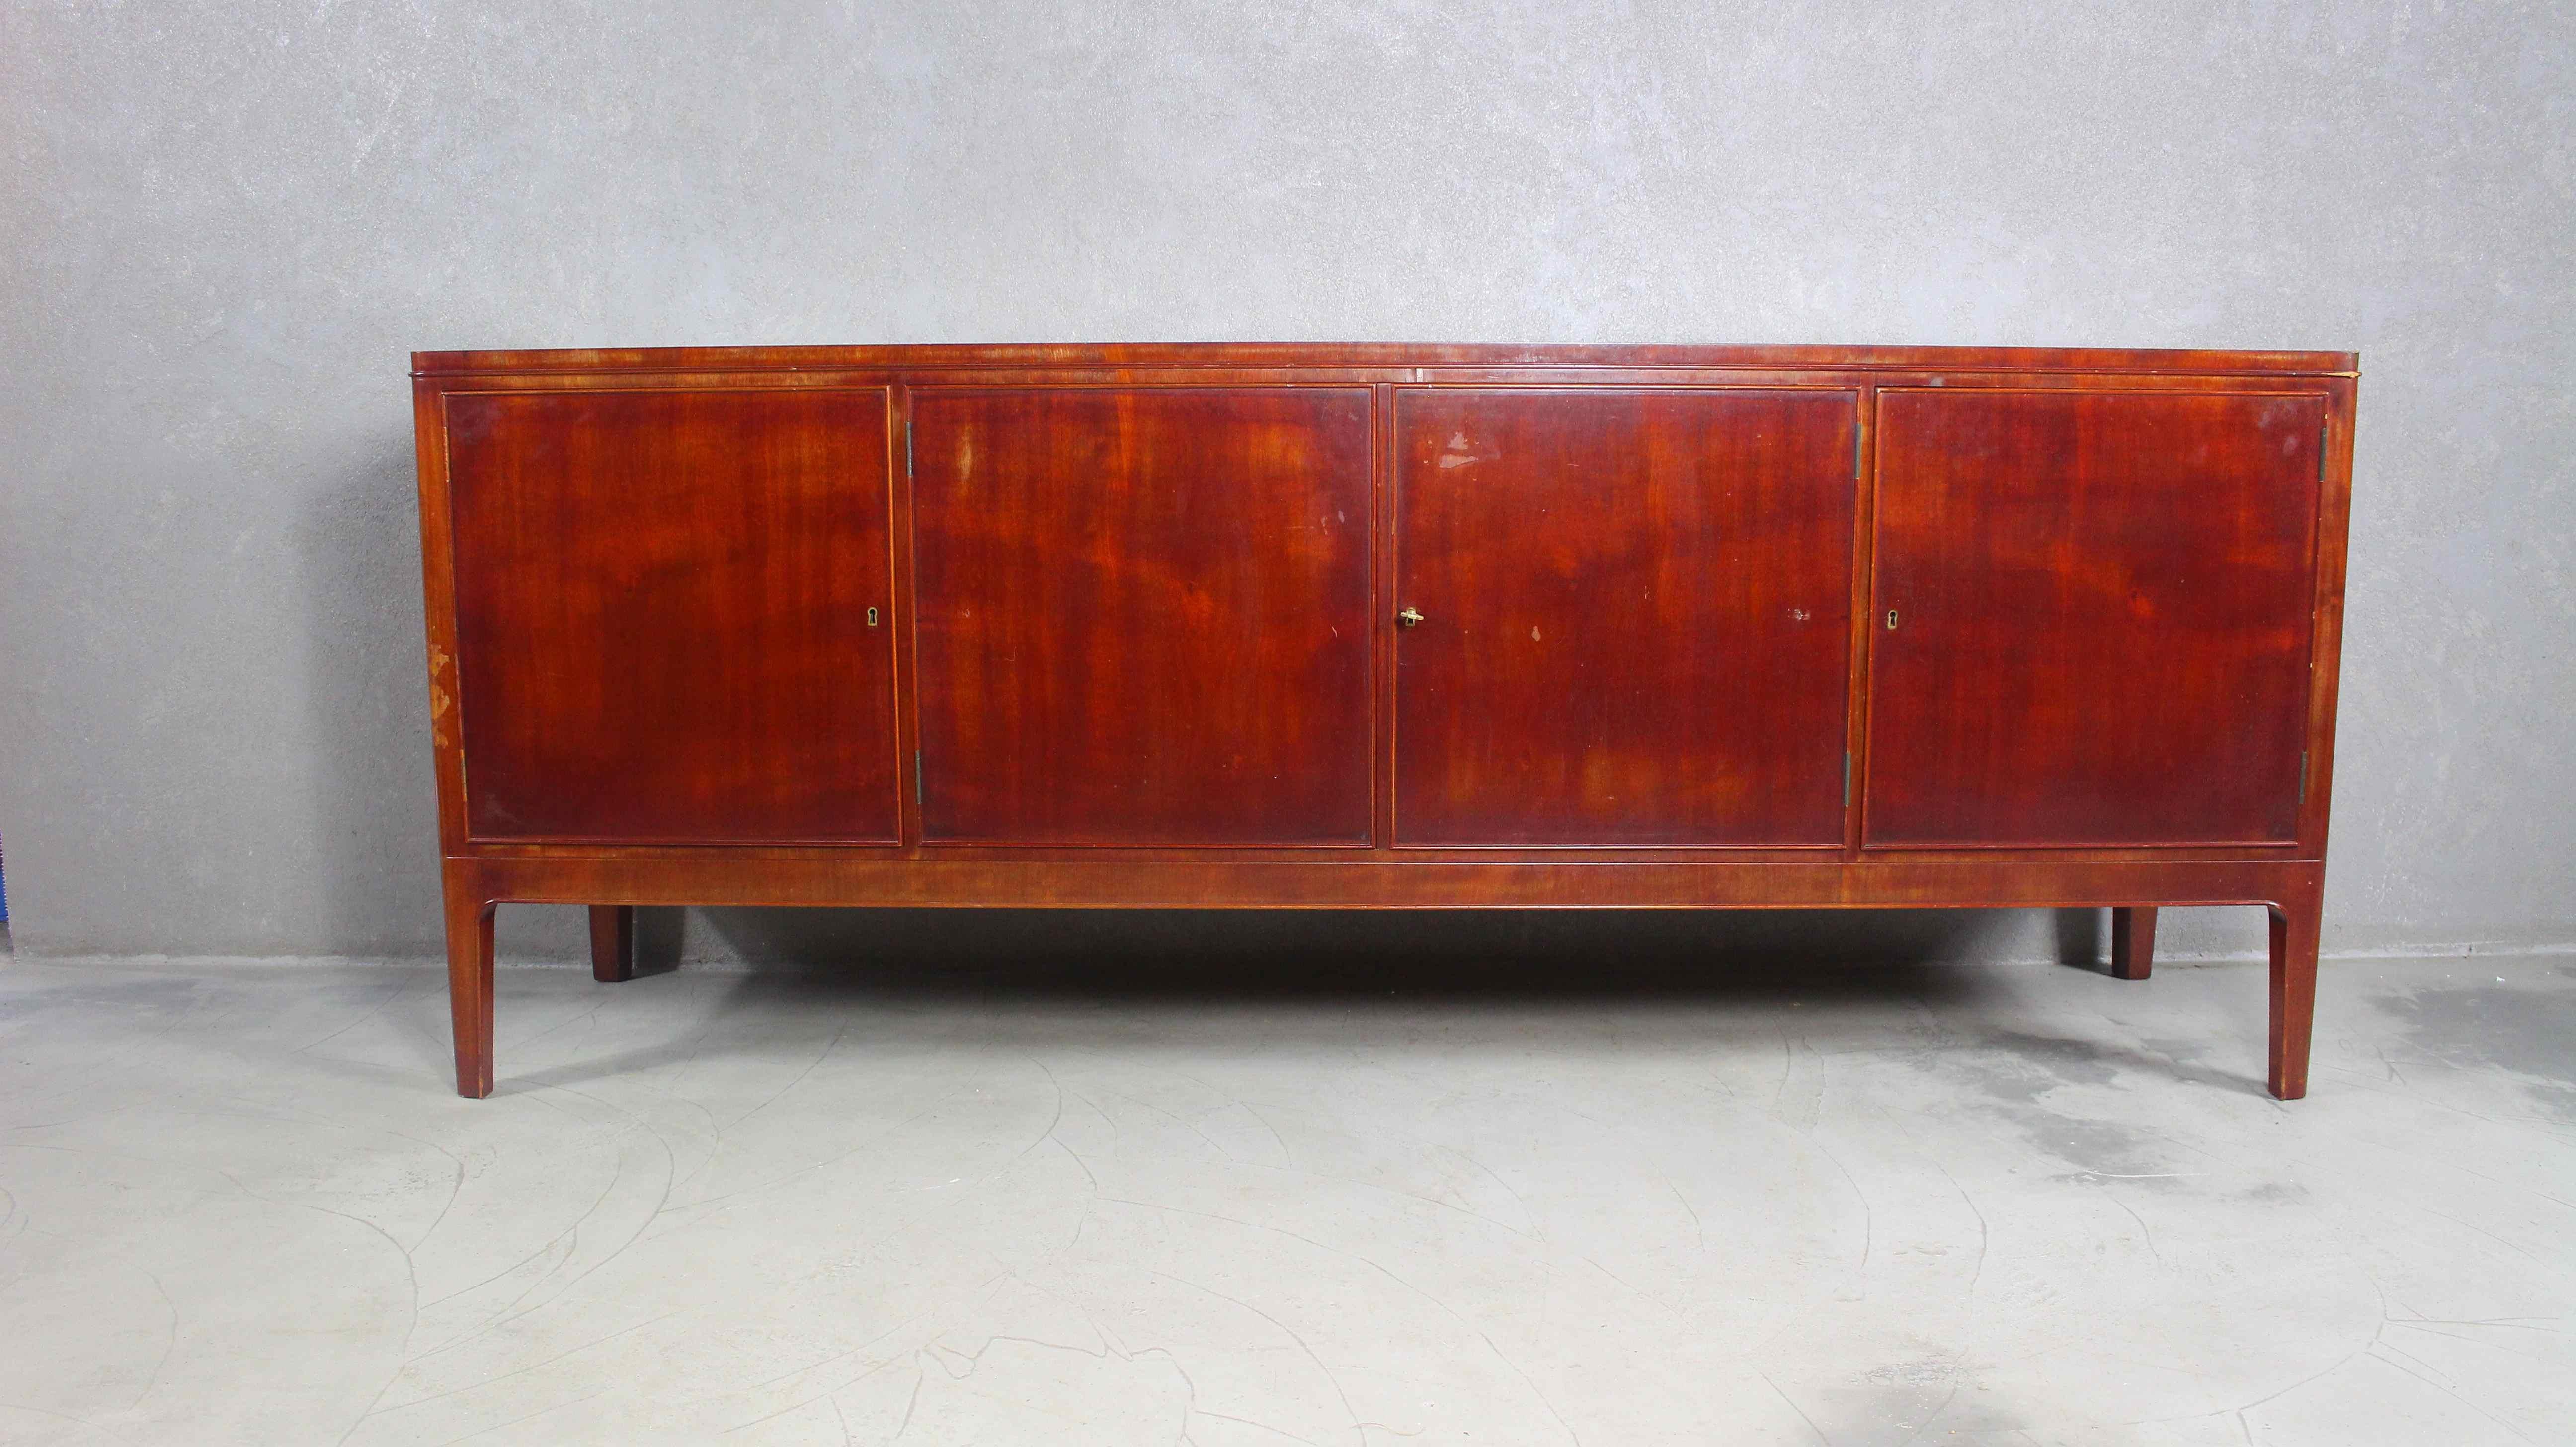 Danish mahogany sidebord from 1940s.
A long, massive piece of furniture with 3 opening shelves.
Made in Denmark during 1940s.
Manufactured by CB Hansens.